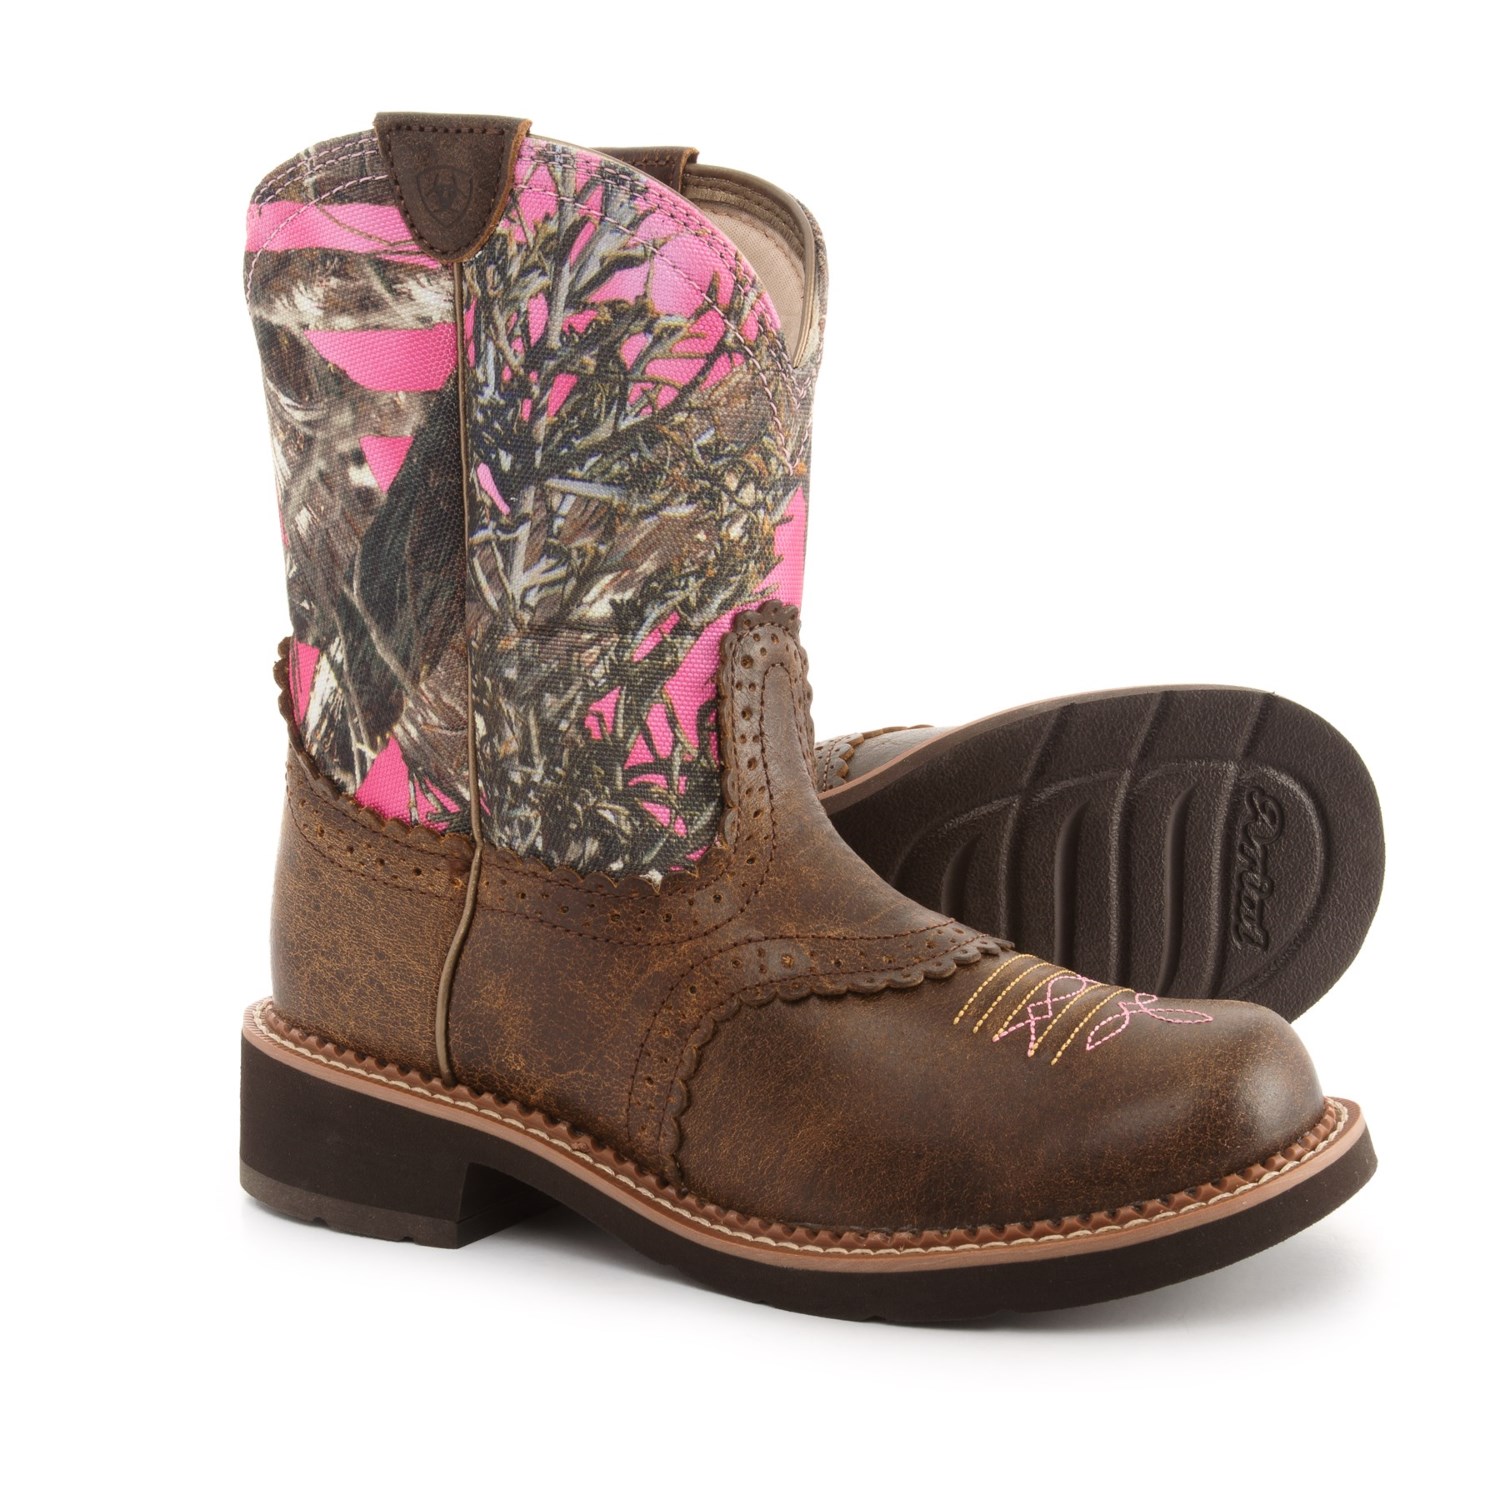 Ariat Fat Baby Heritage Cowboy Boots (For Women) - Save 37%